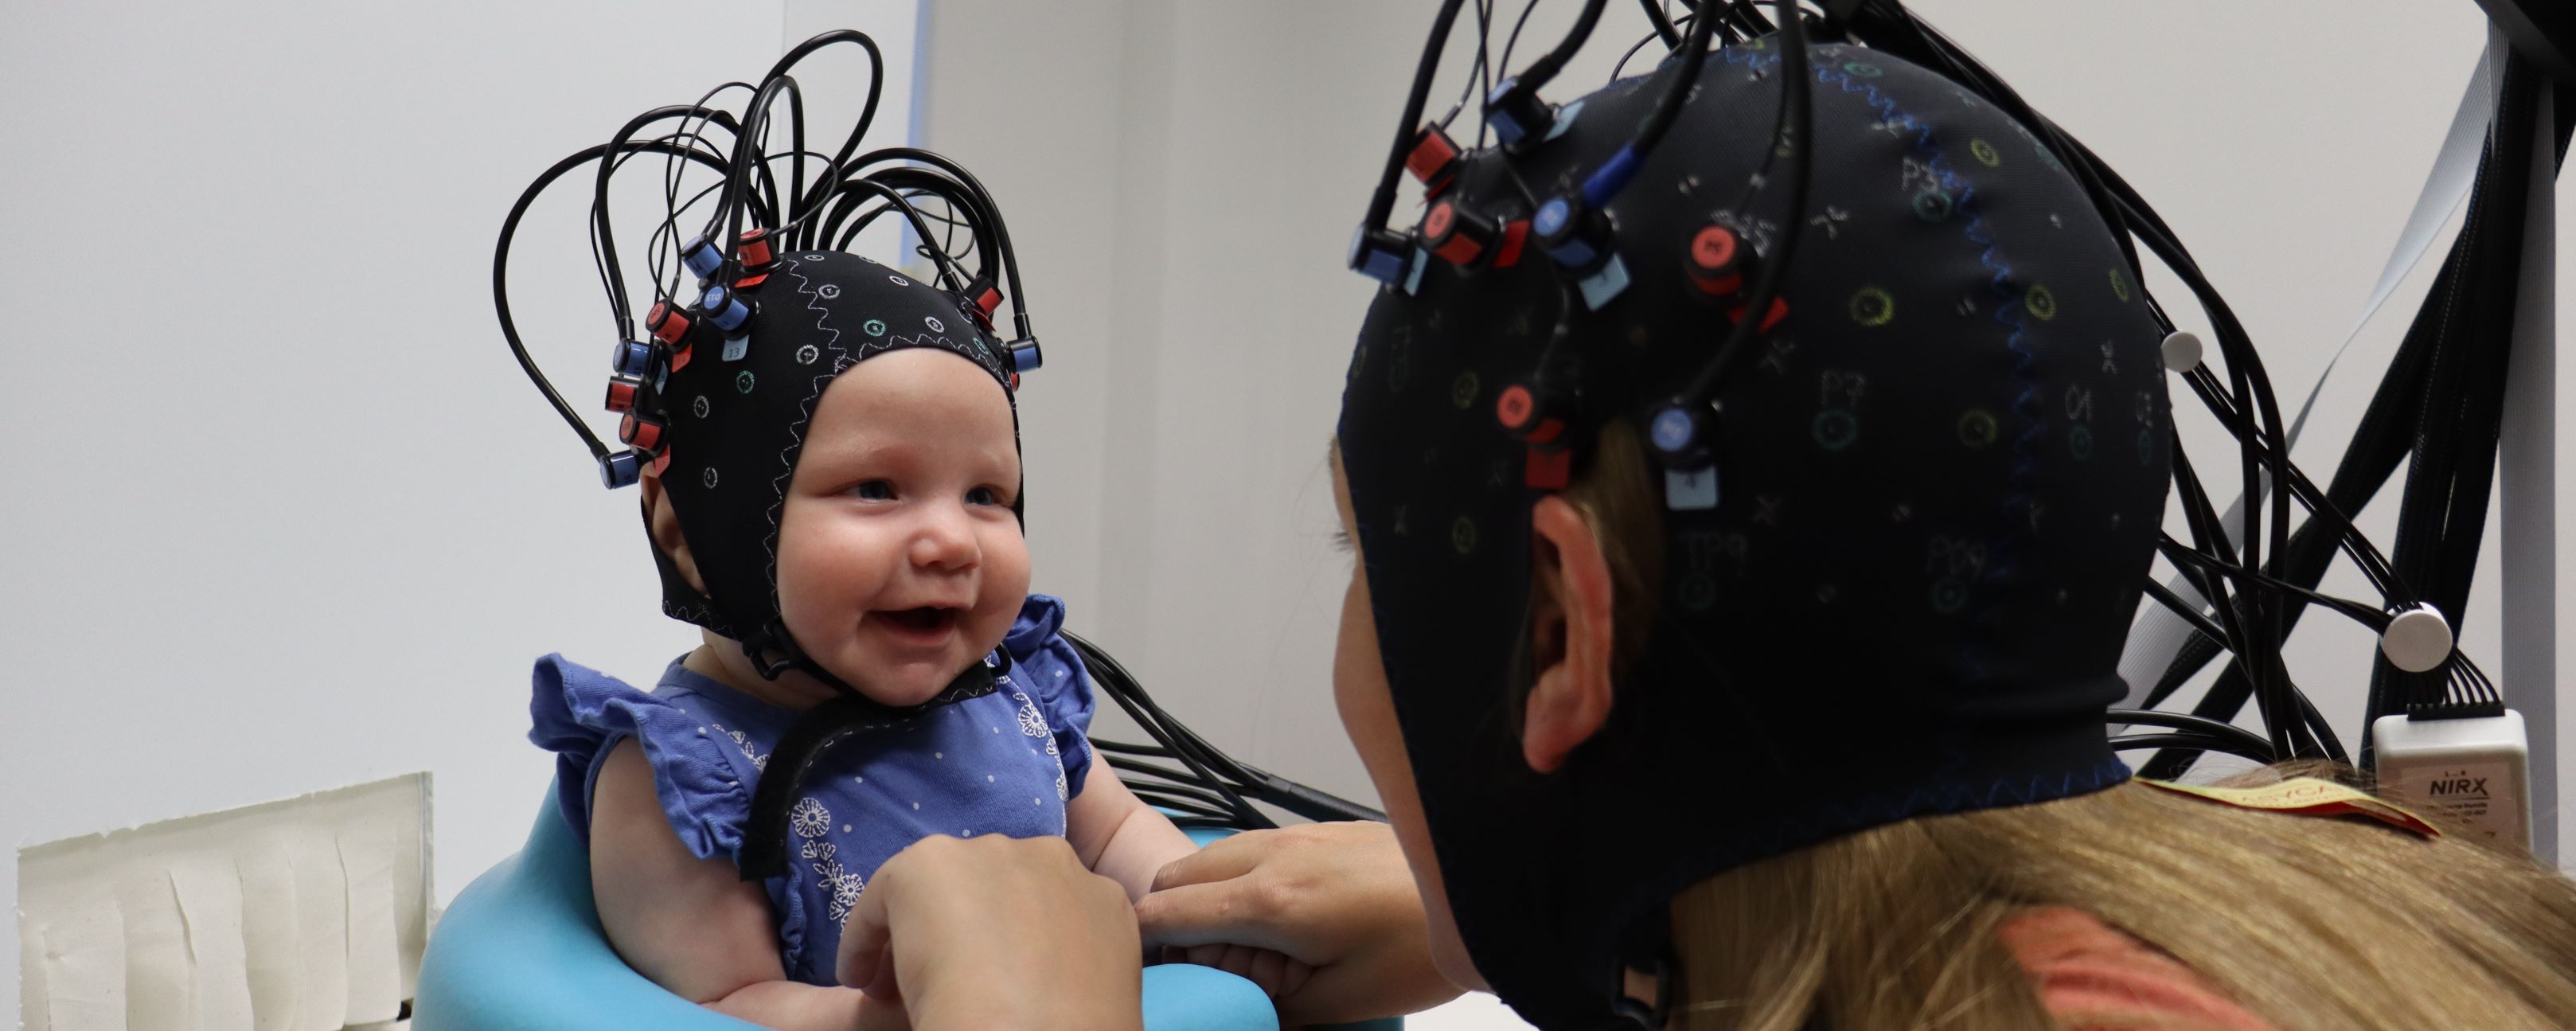 Infant and mother in neuroimaging headgear. Infant is smiling.